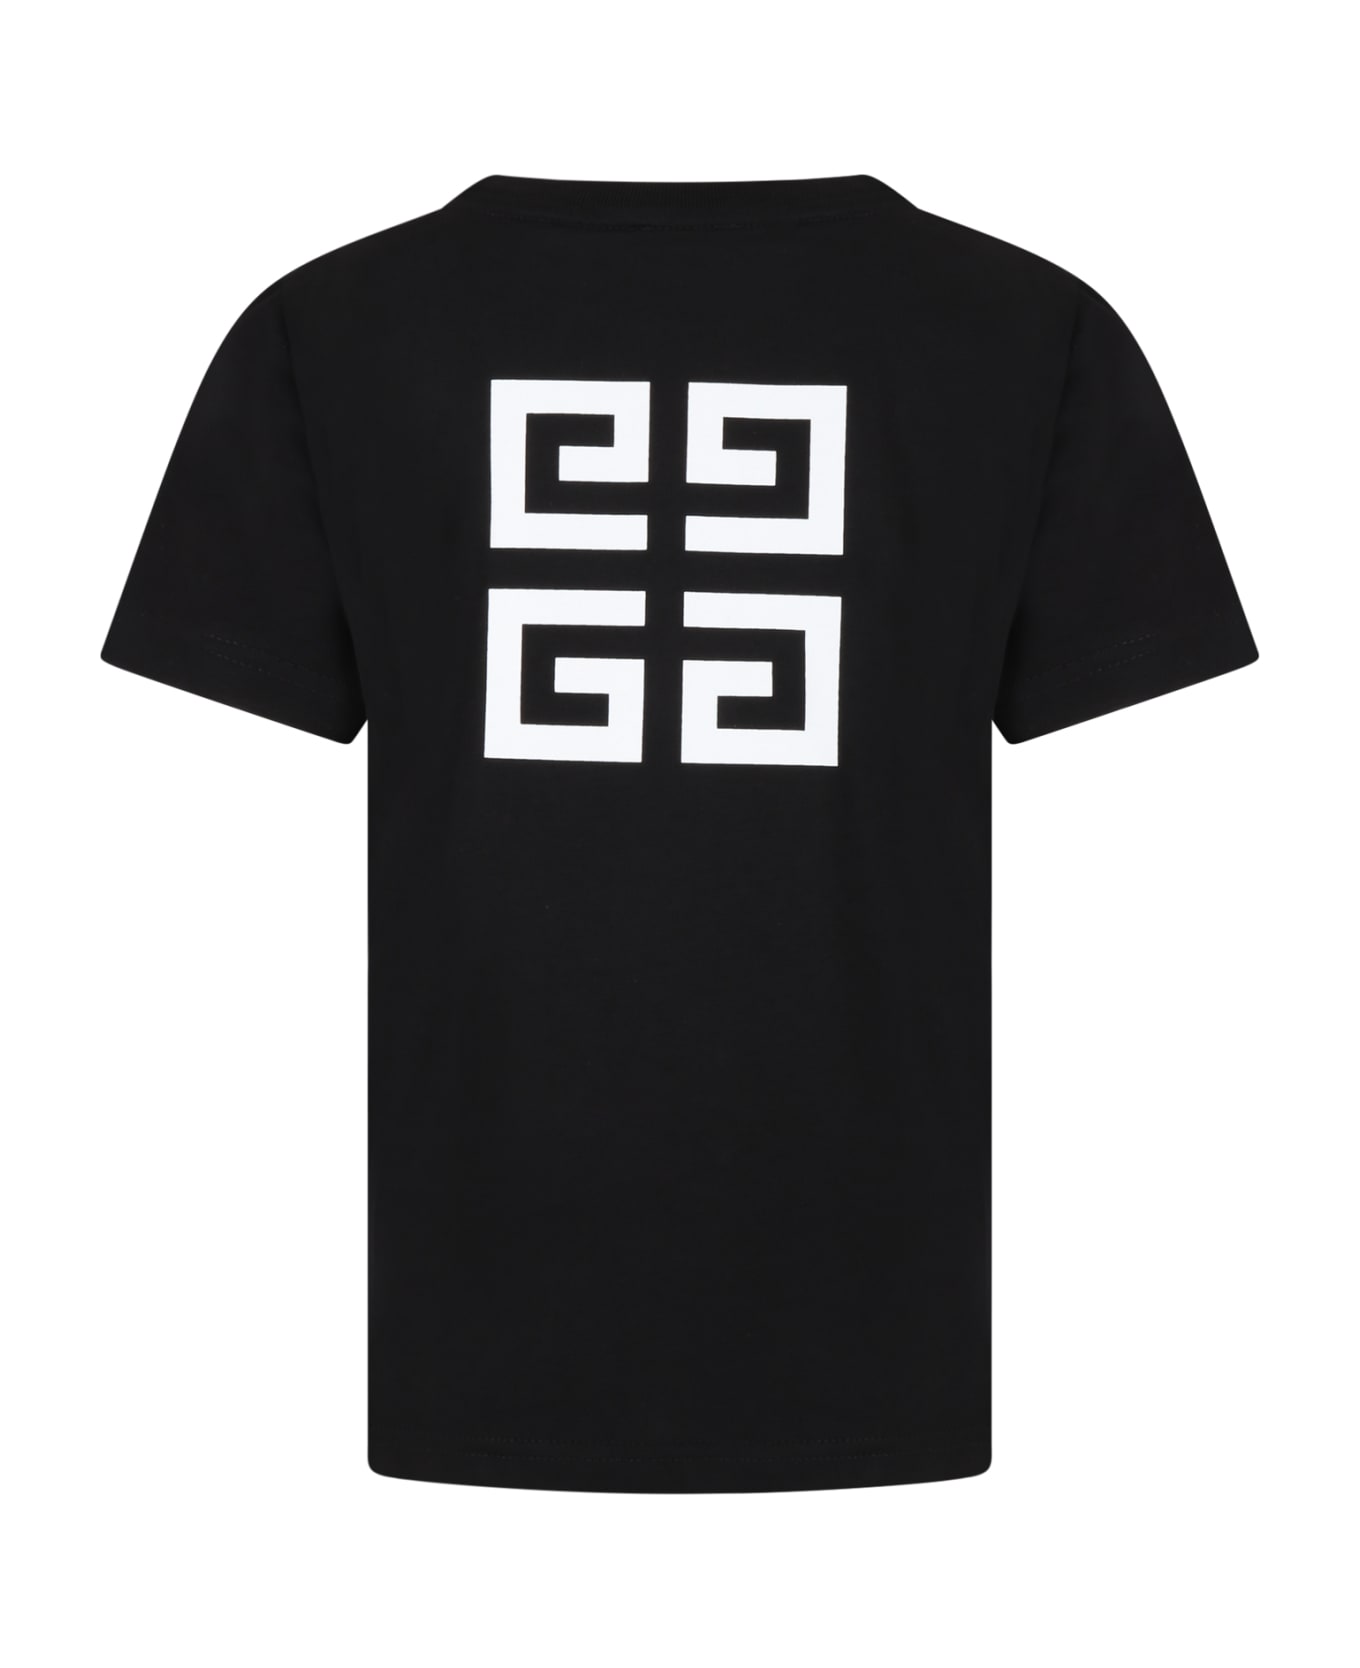 Givenchy Black T-shirt For Boy With White Logo - Nero